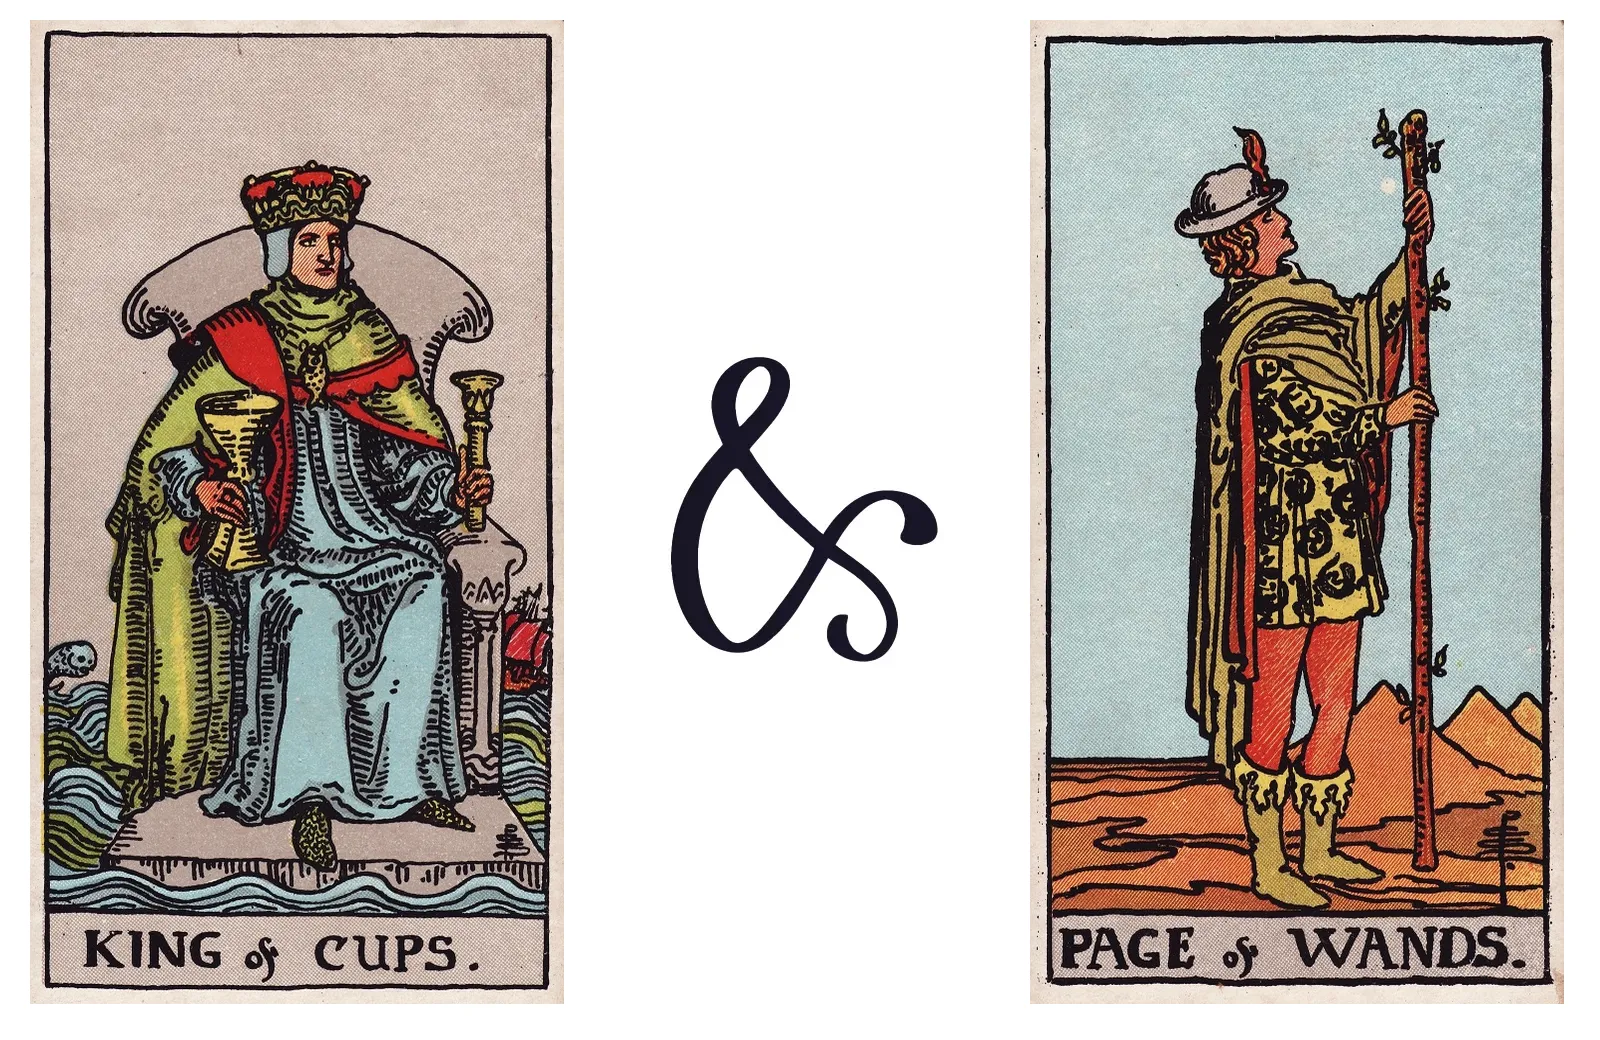 King of Cups and Page of Wands